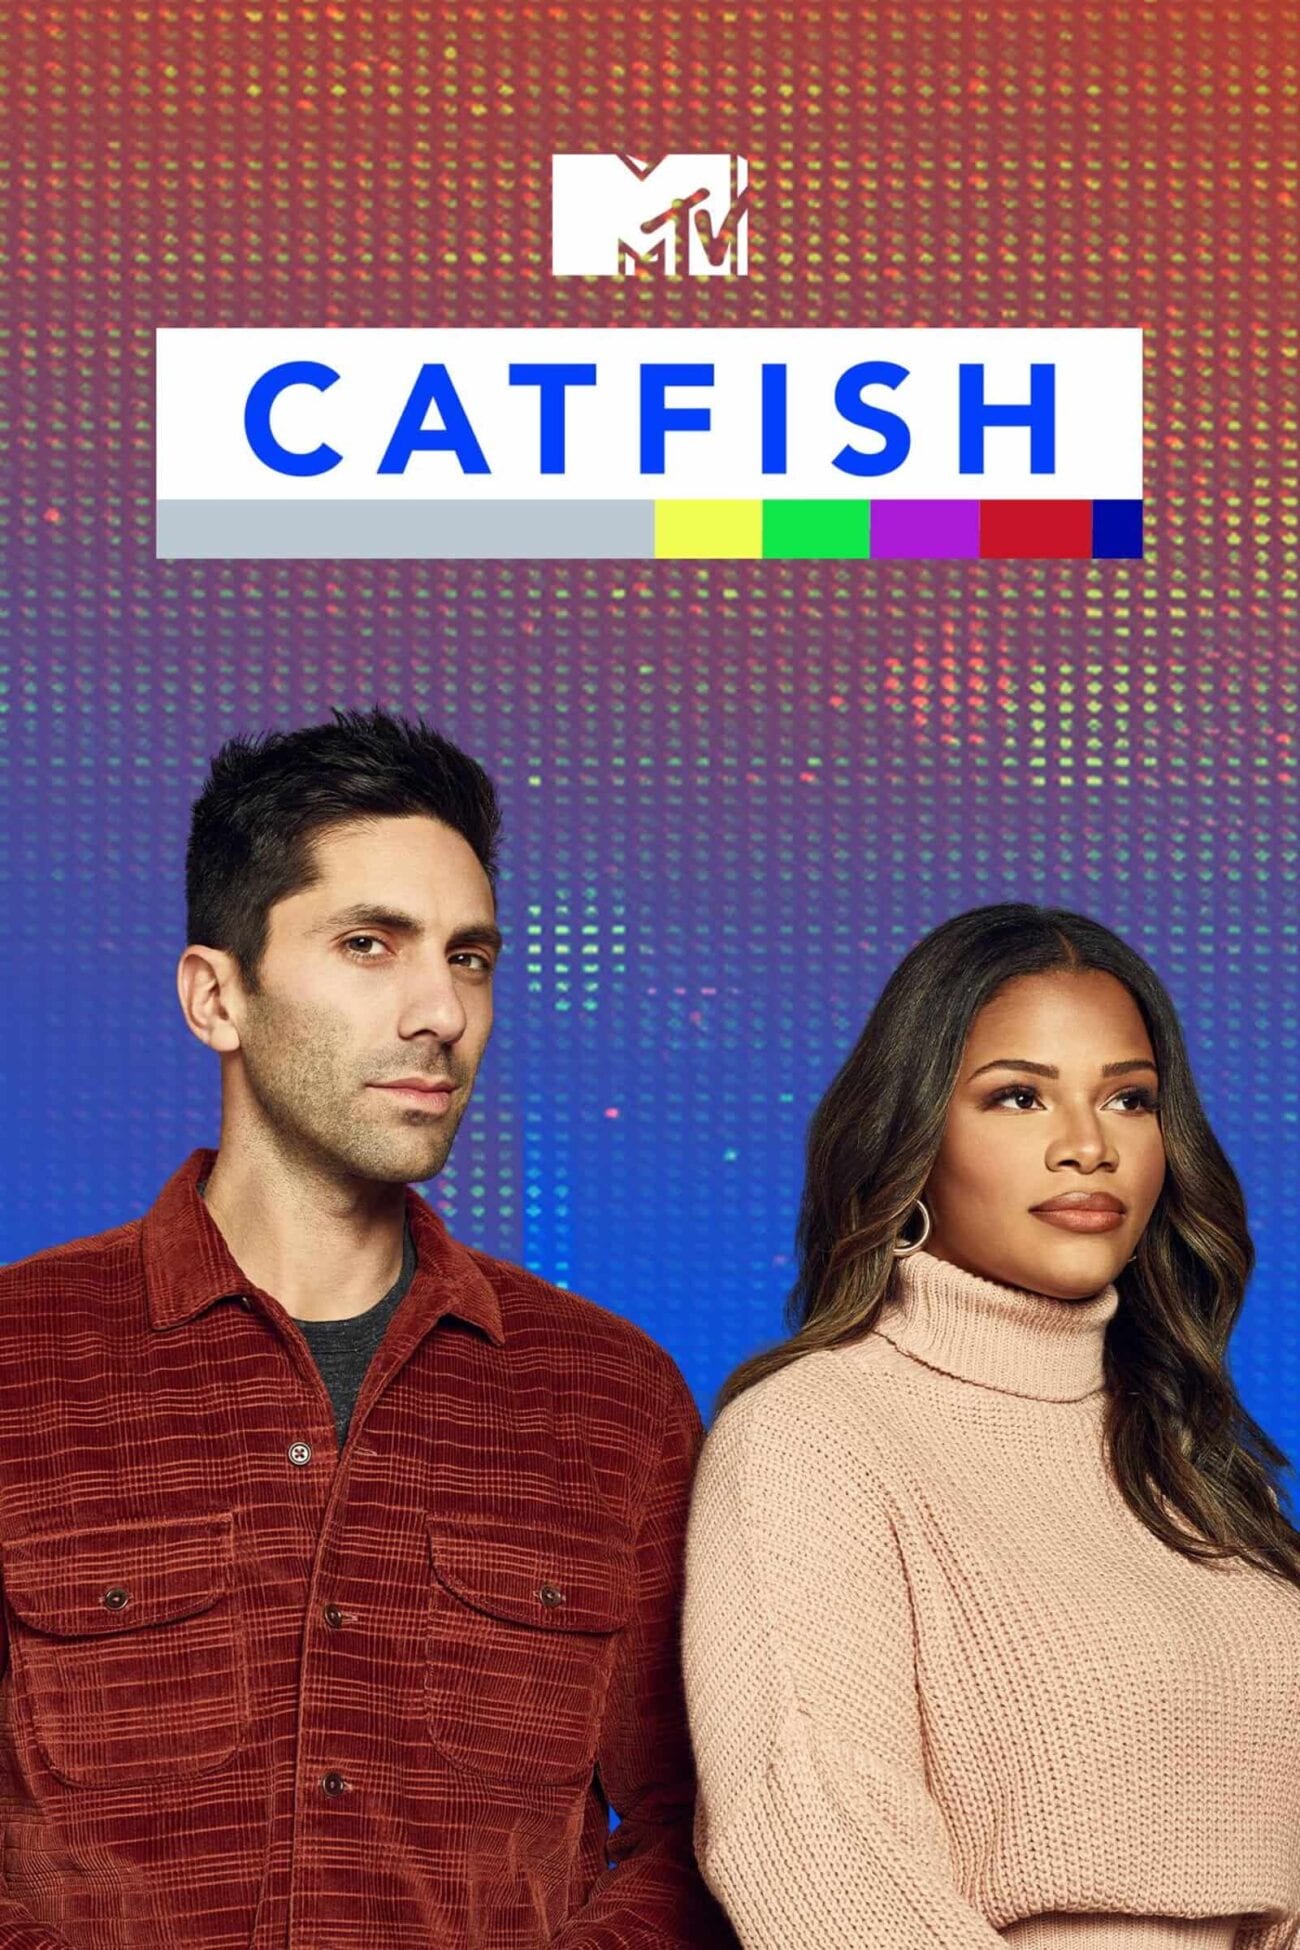 'Catfish: The TV Show' breathed new life into MTV when the show came out. Bingewatch these other addictive MTV shows now.